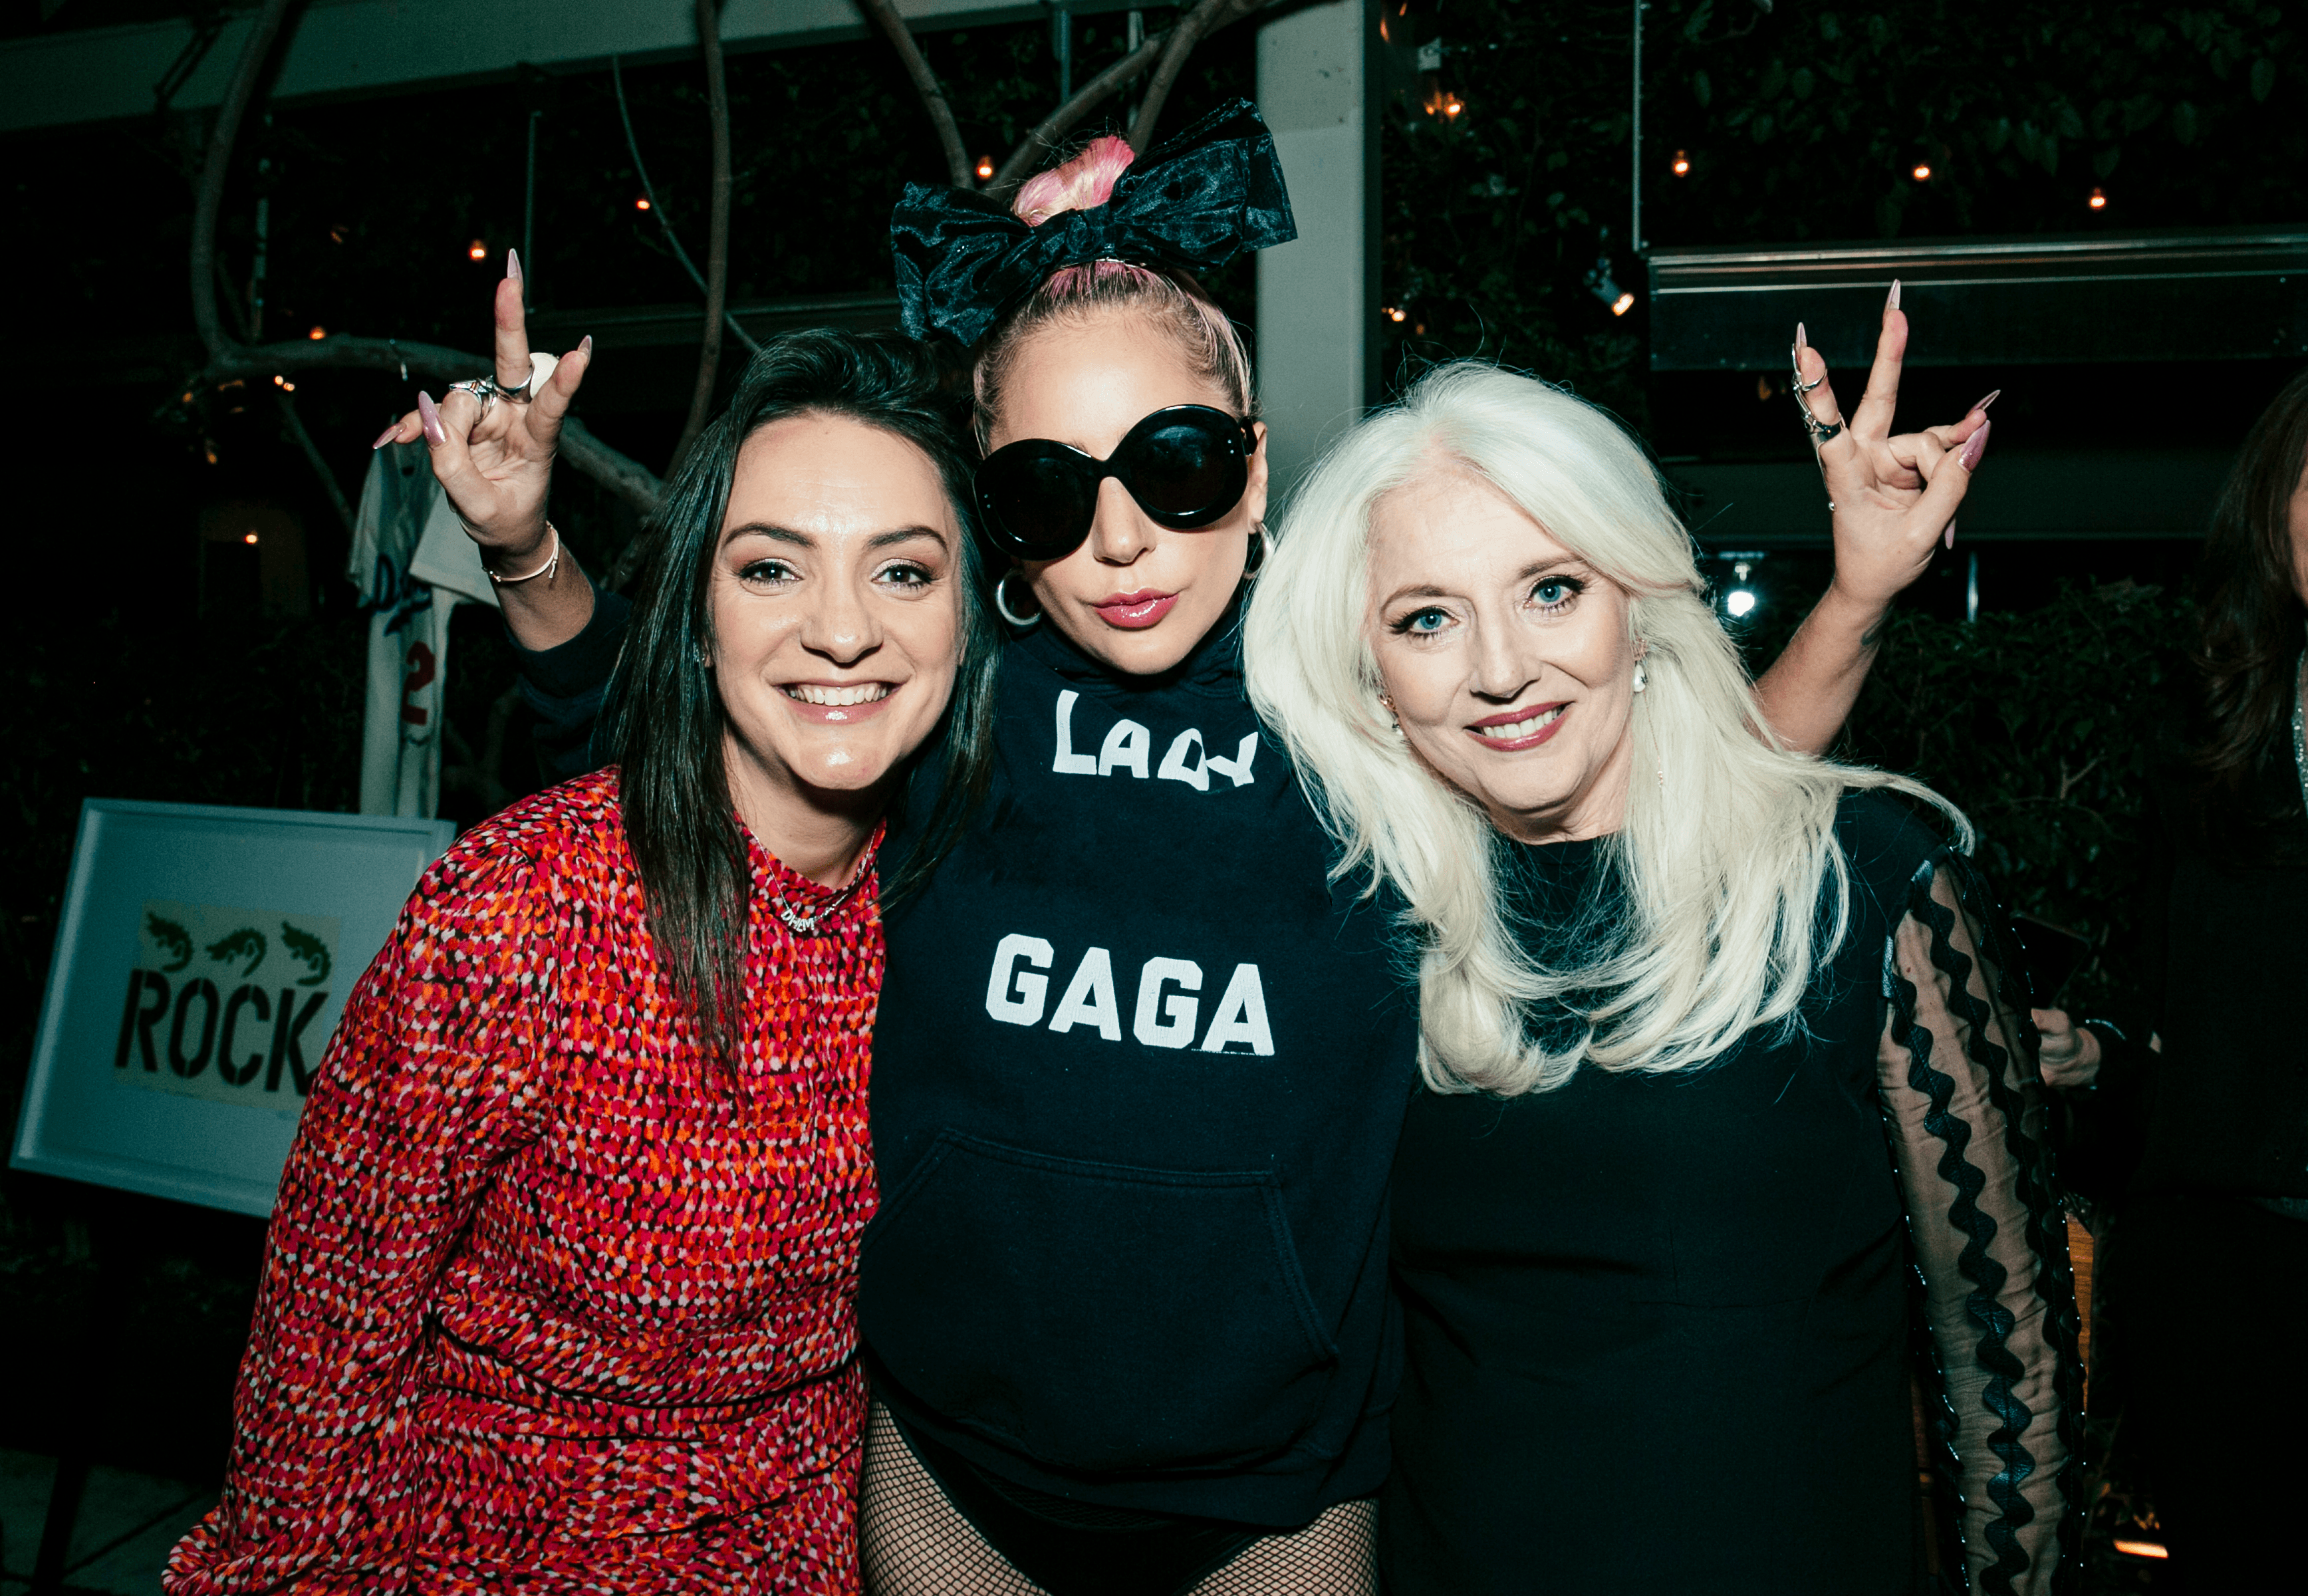 Left to right, Born This Way executive director, Maya Smith, Lady Gaga, and President and co-founder, Cynthia Germanotta, Gaga&#039;s mom.Photo compliments of Born This Way Foundation